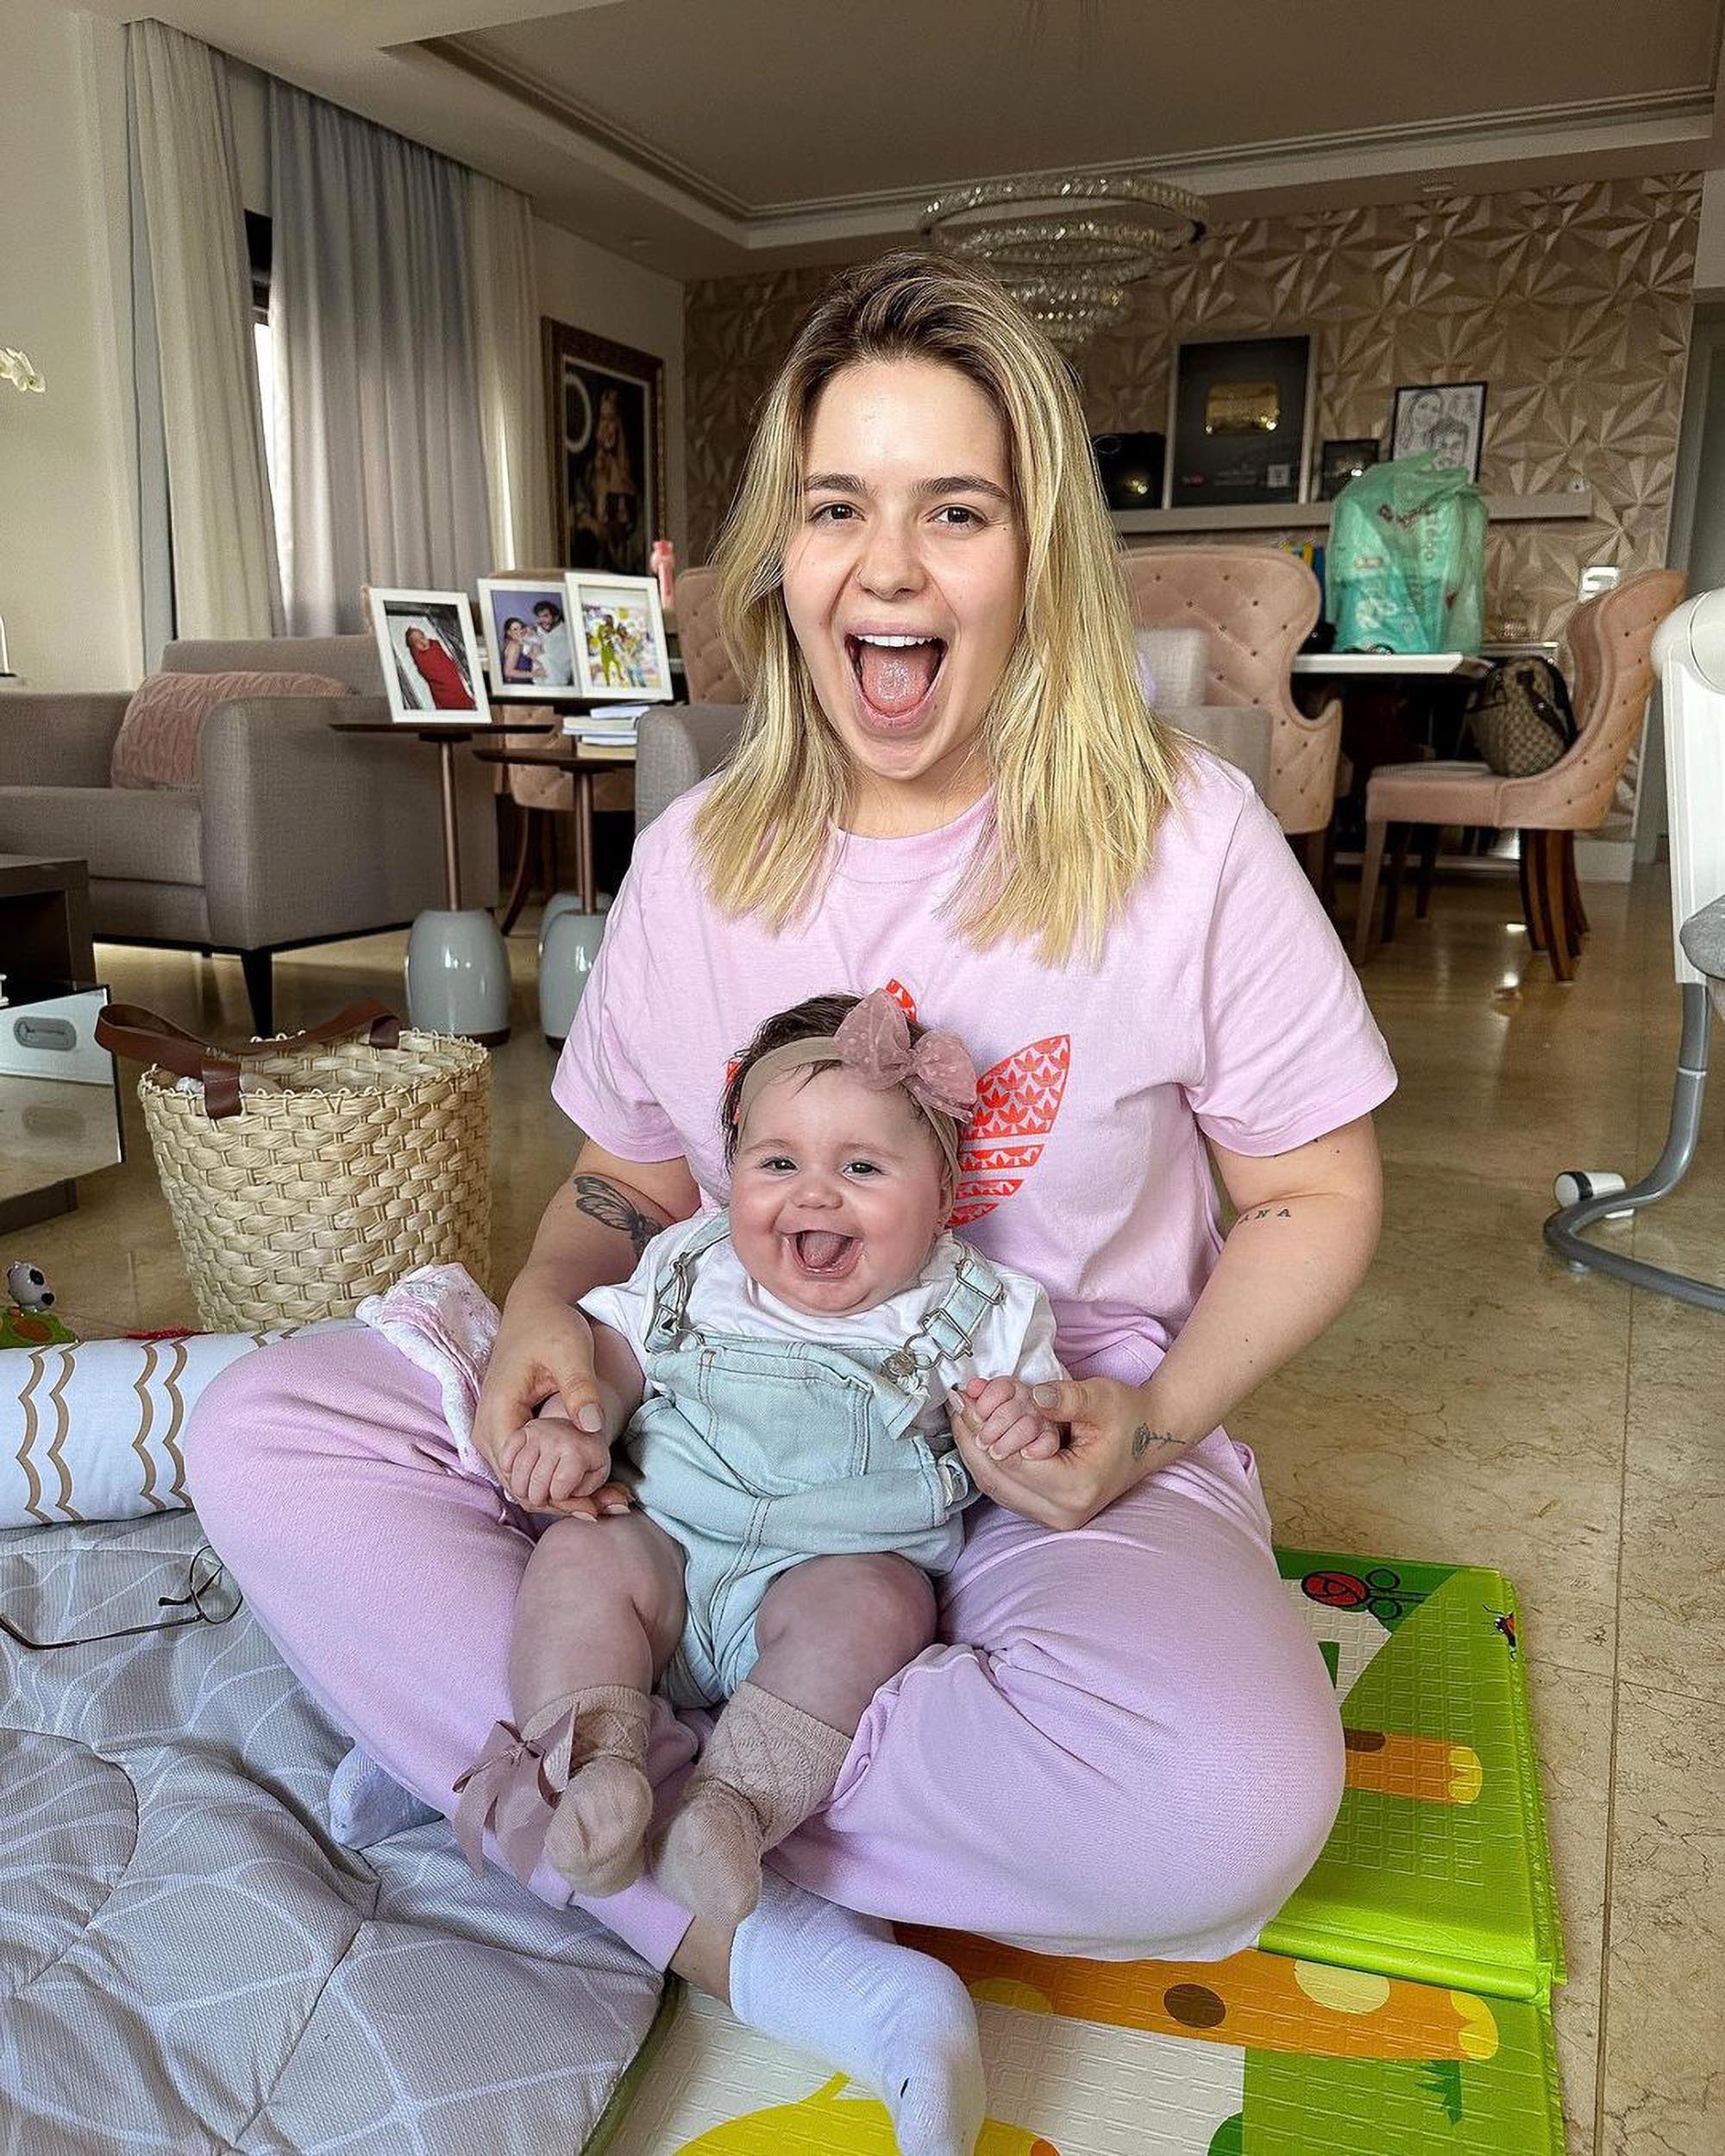 Brazilian blogger Viih Tube is planning an extravagant bash for little Lua's first birthday